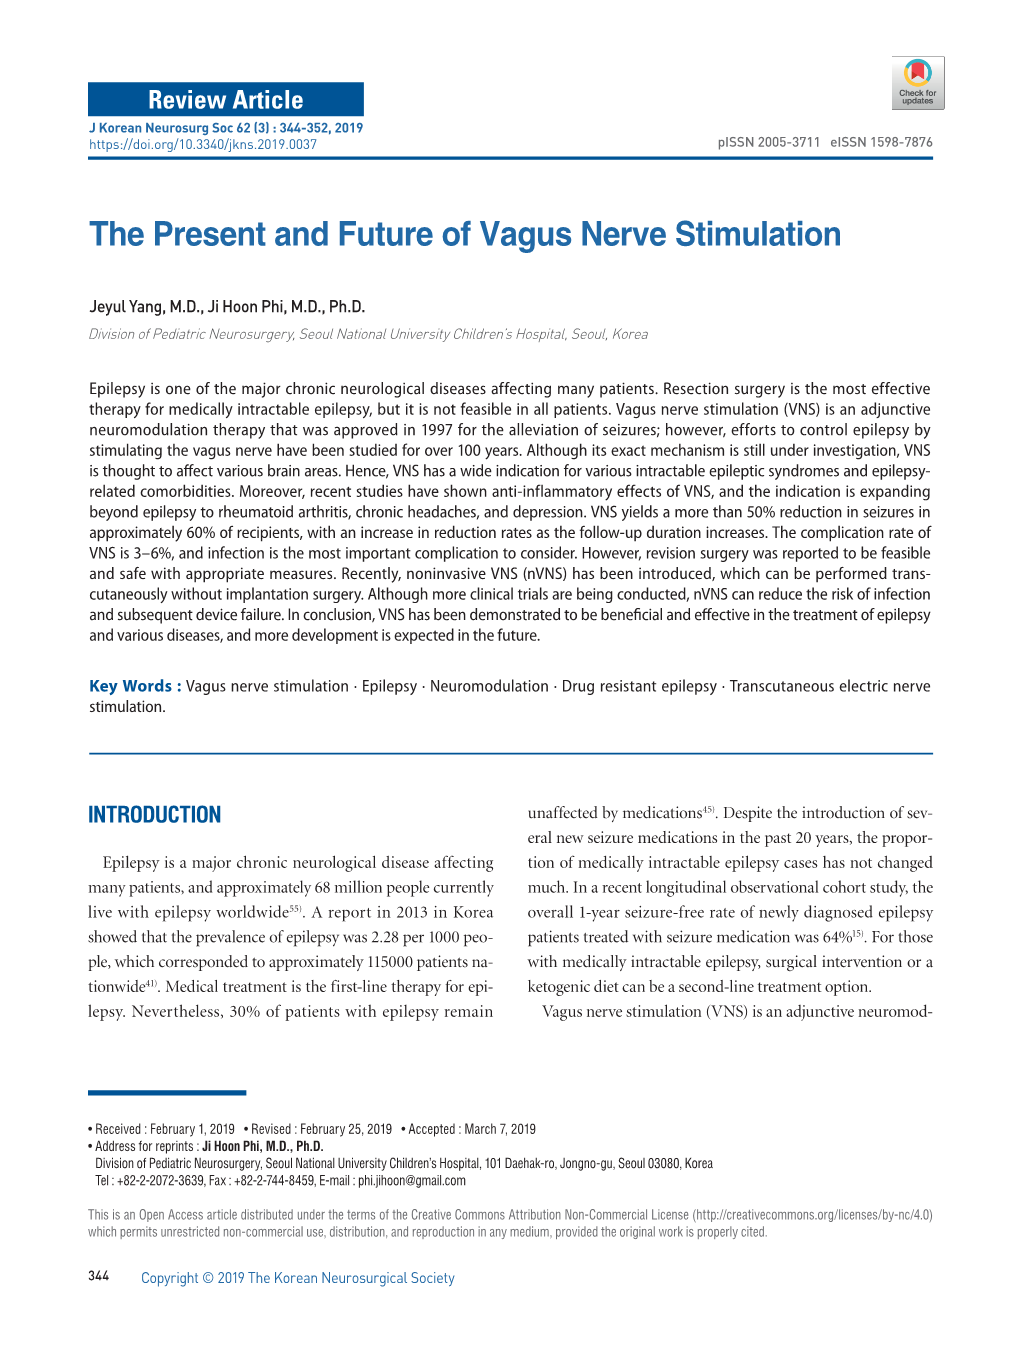 The Present and Future of Vagus Nerve Stimulation